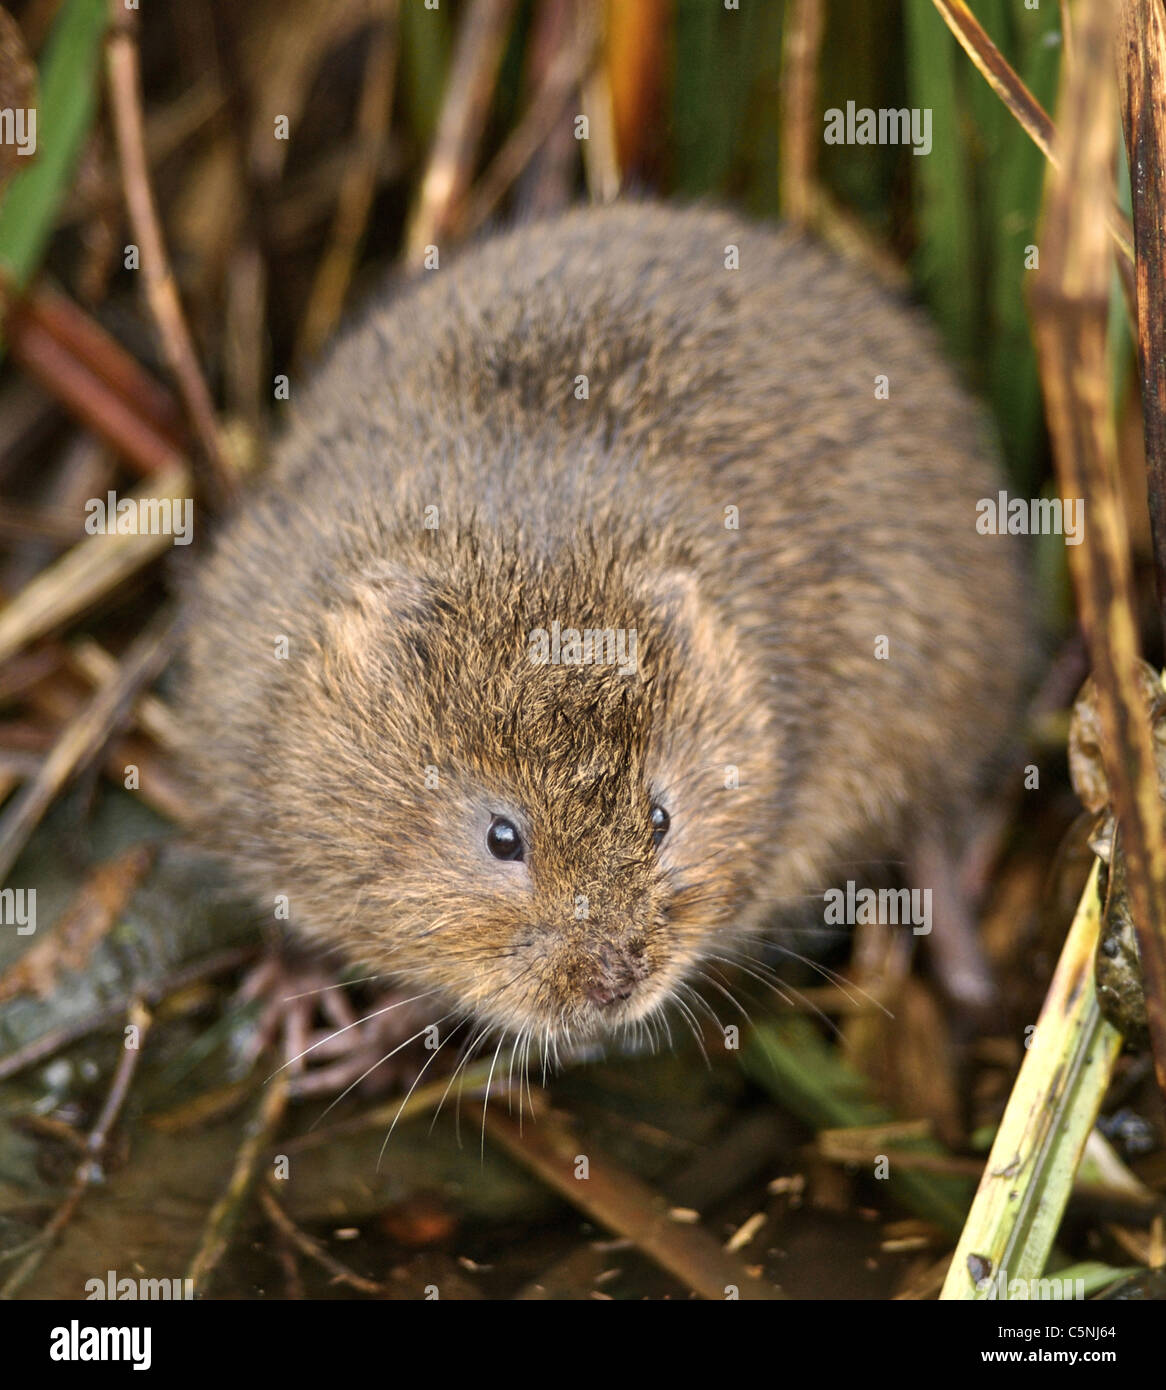 The European Water Vole or Northern Water Vole, Arvicola amphibius (formerly A. terrestris), is a semi-aquatic rodent. From the archives of Press Portrait Service (formerly Press Portrait Bureau) Stock Photo